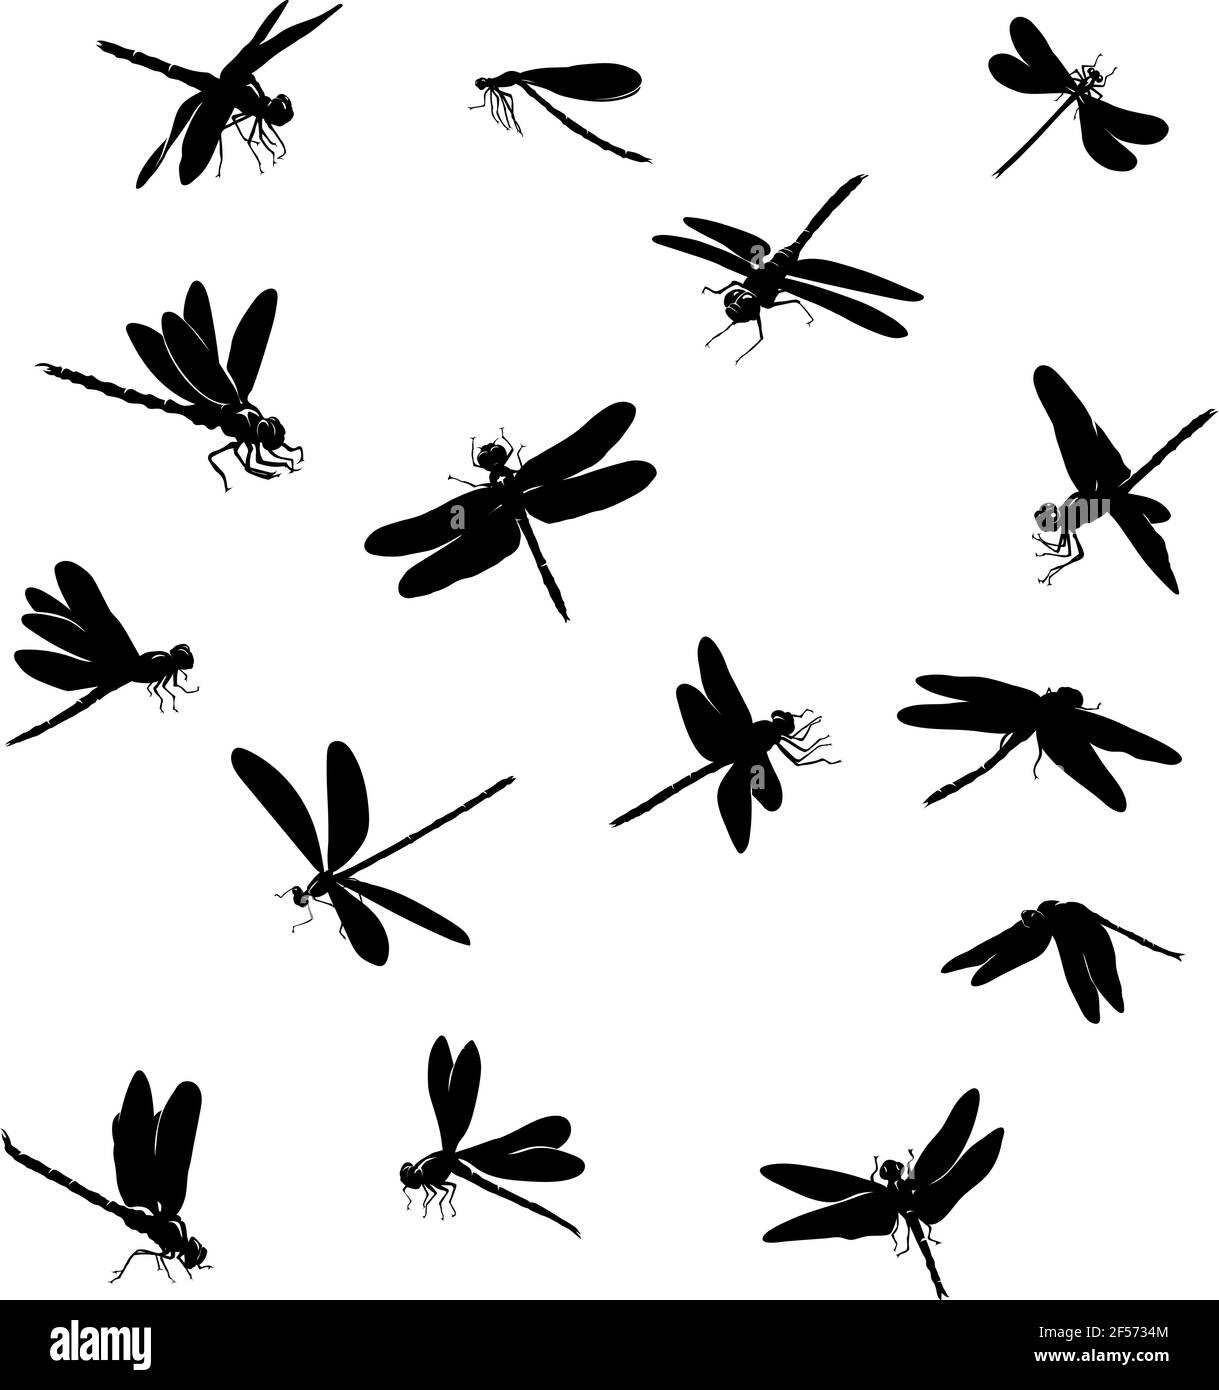 dragonfly, insect, various poses, movements and foreshortenings of figures, black, , black silhouette, pattern Stock Vector